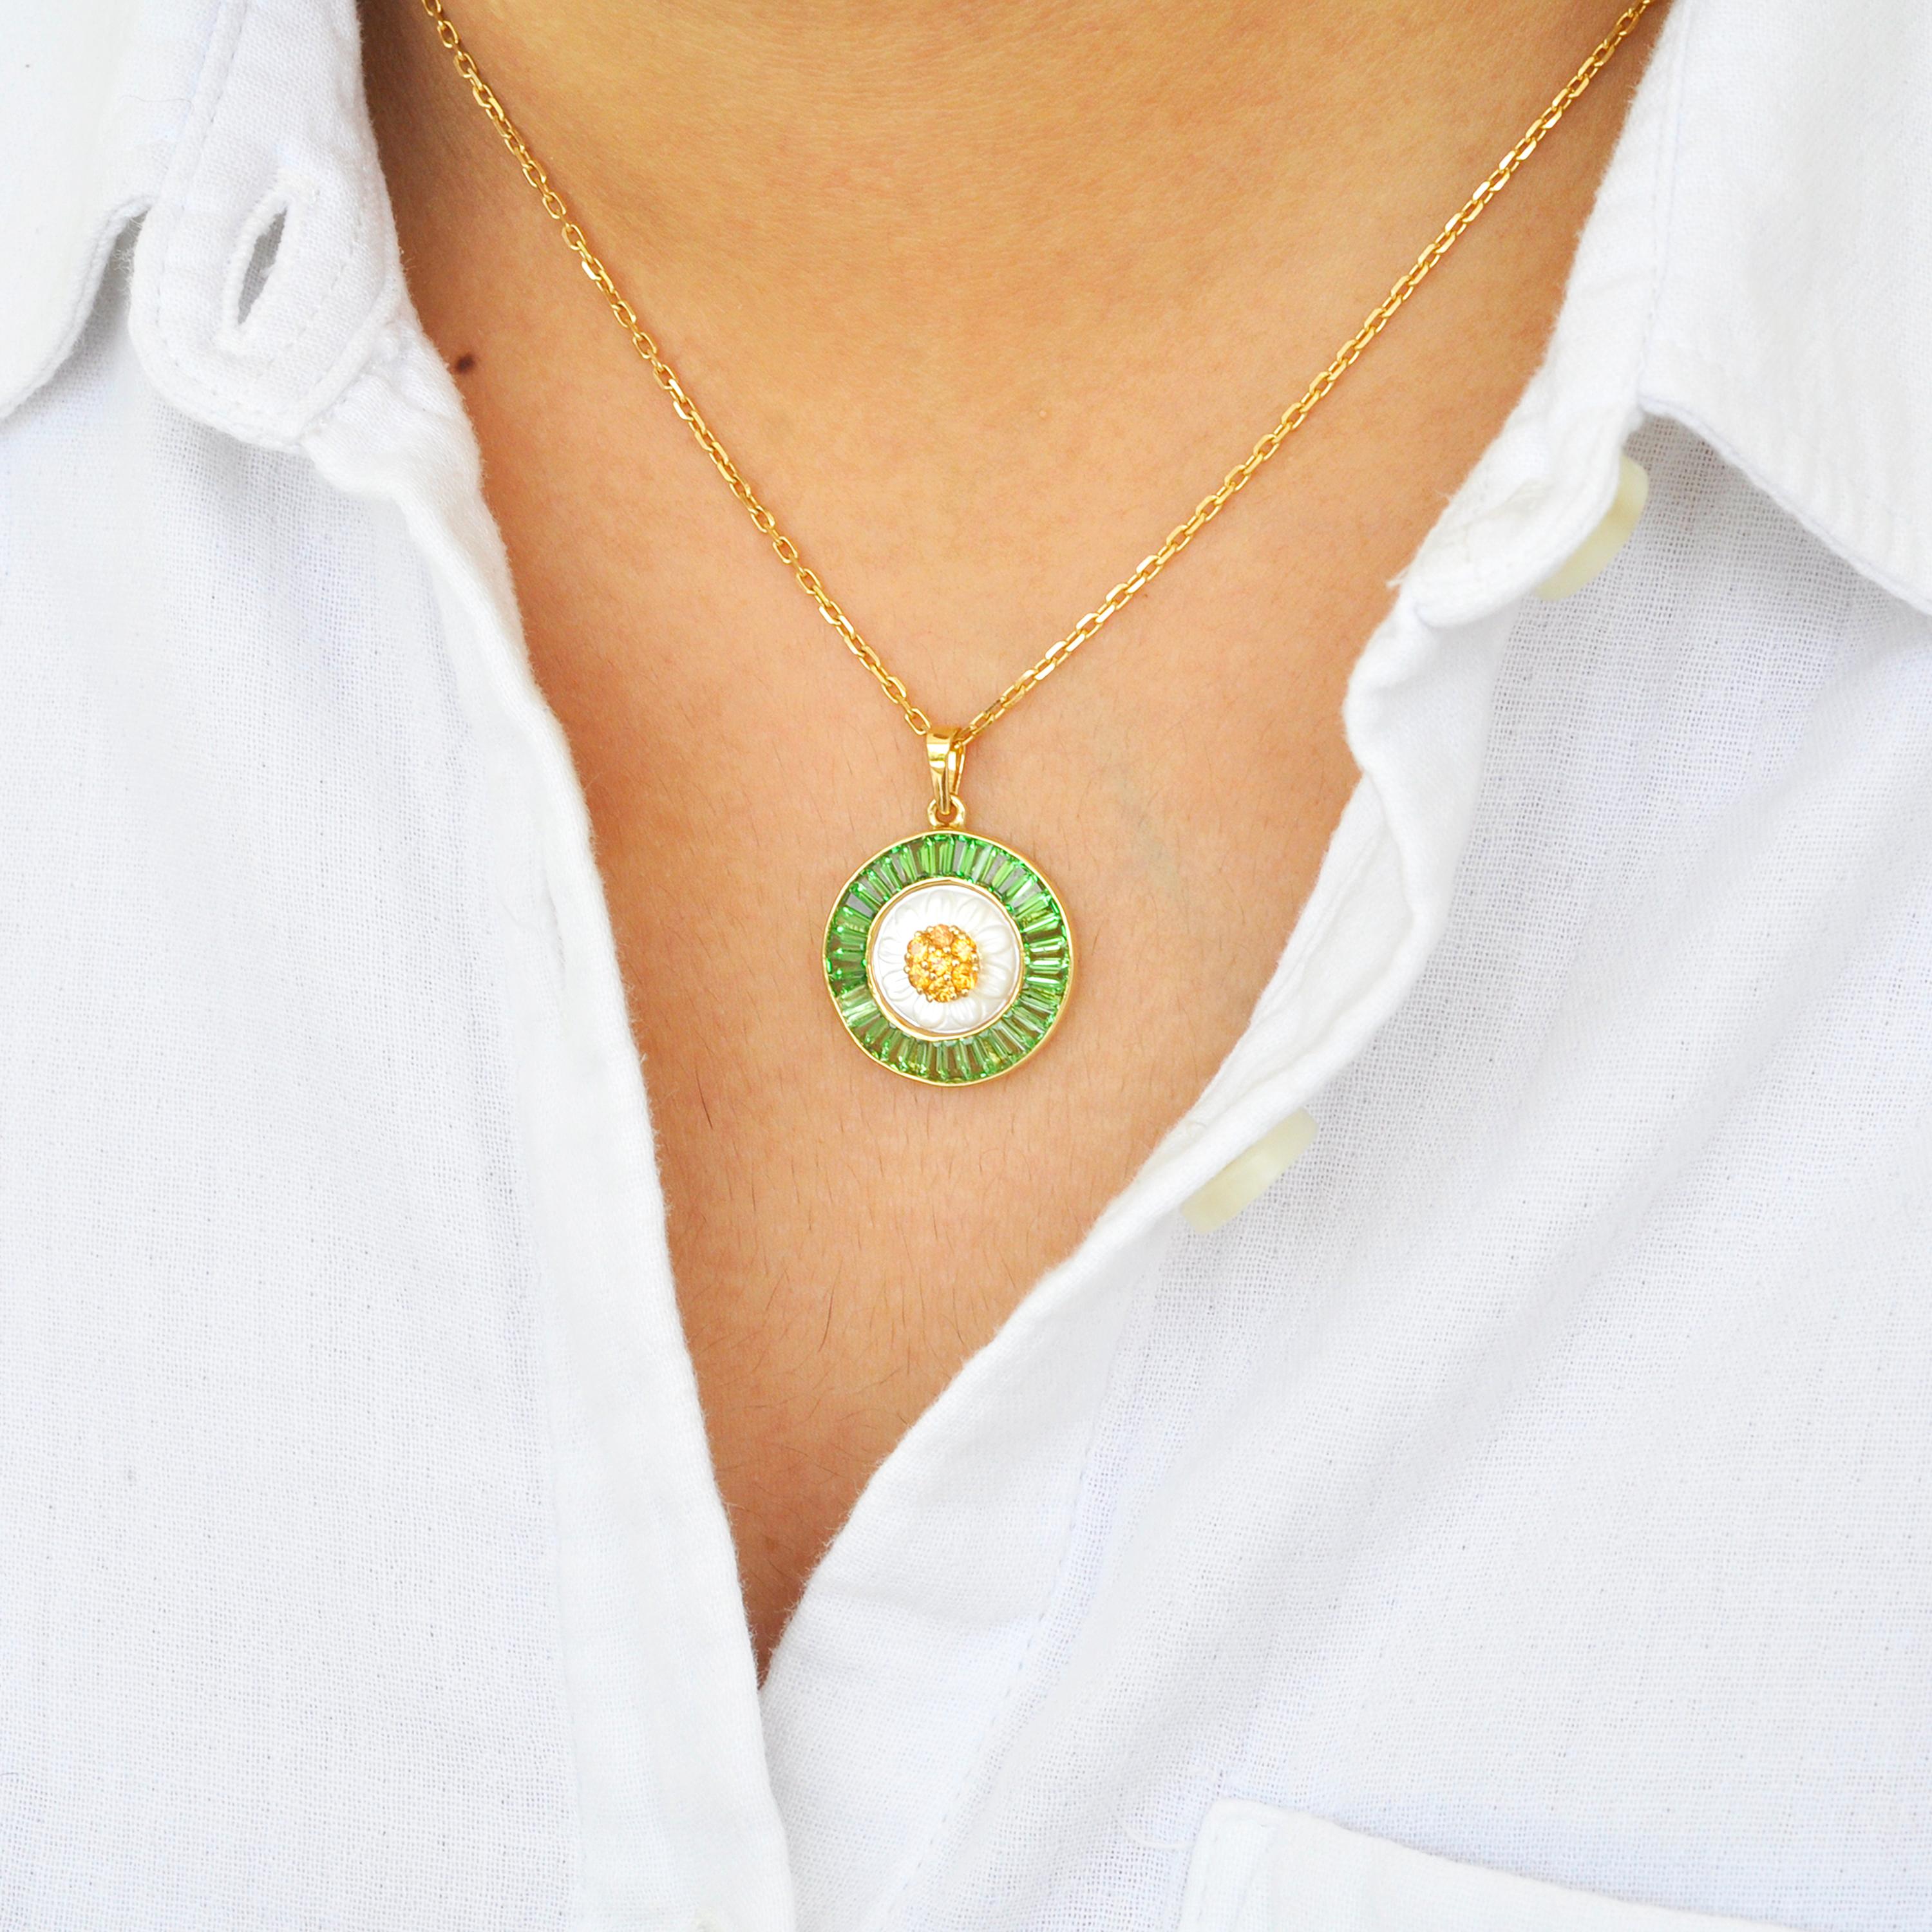 18 karat yellow gold tsavorite carved mother of pearl flower yellow sapphire pendant

This 18 karat yellow gold is a tribute to the magnificence of a Daisy flower. Exhibiting excellent craftsmanship, the pendant centres a daisy carved on mother of